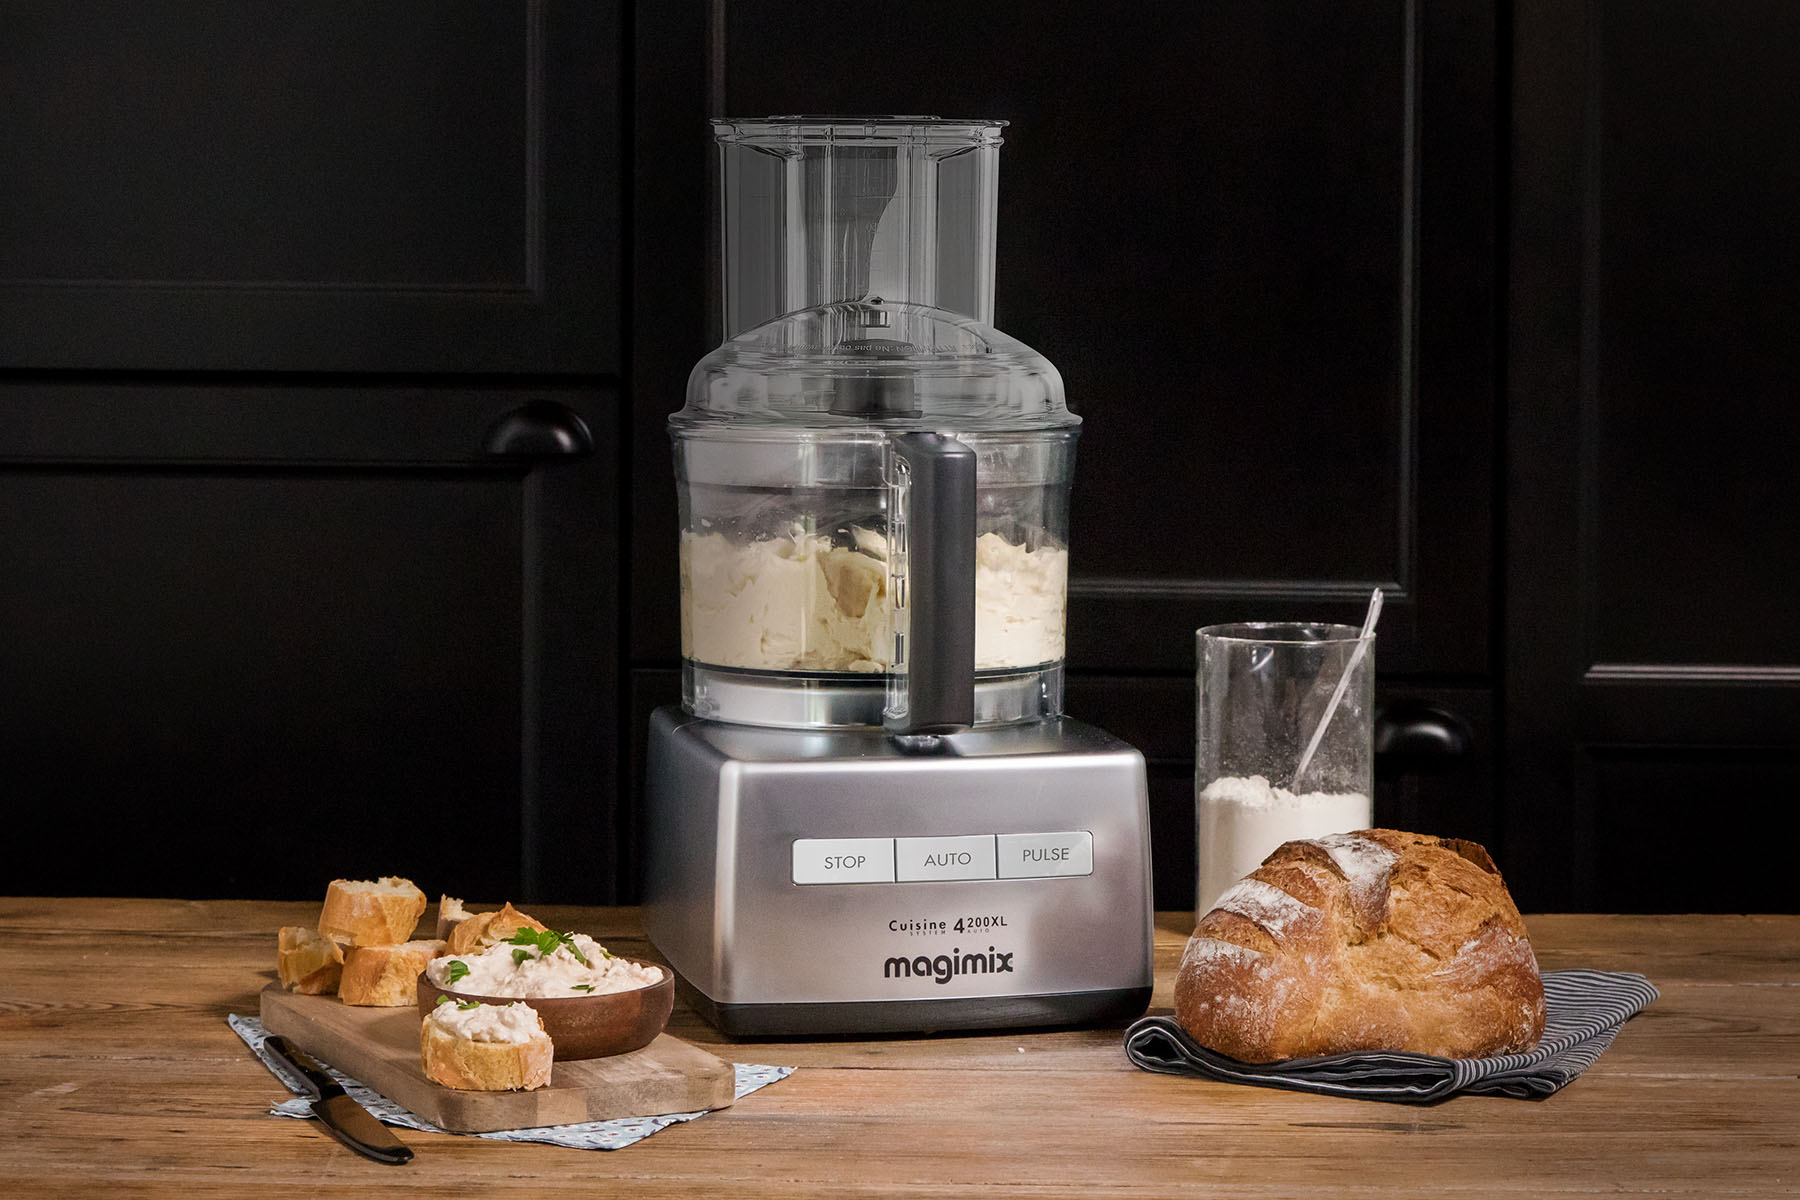 Magimix Food Processor with baked goods and food